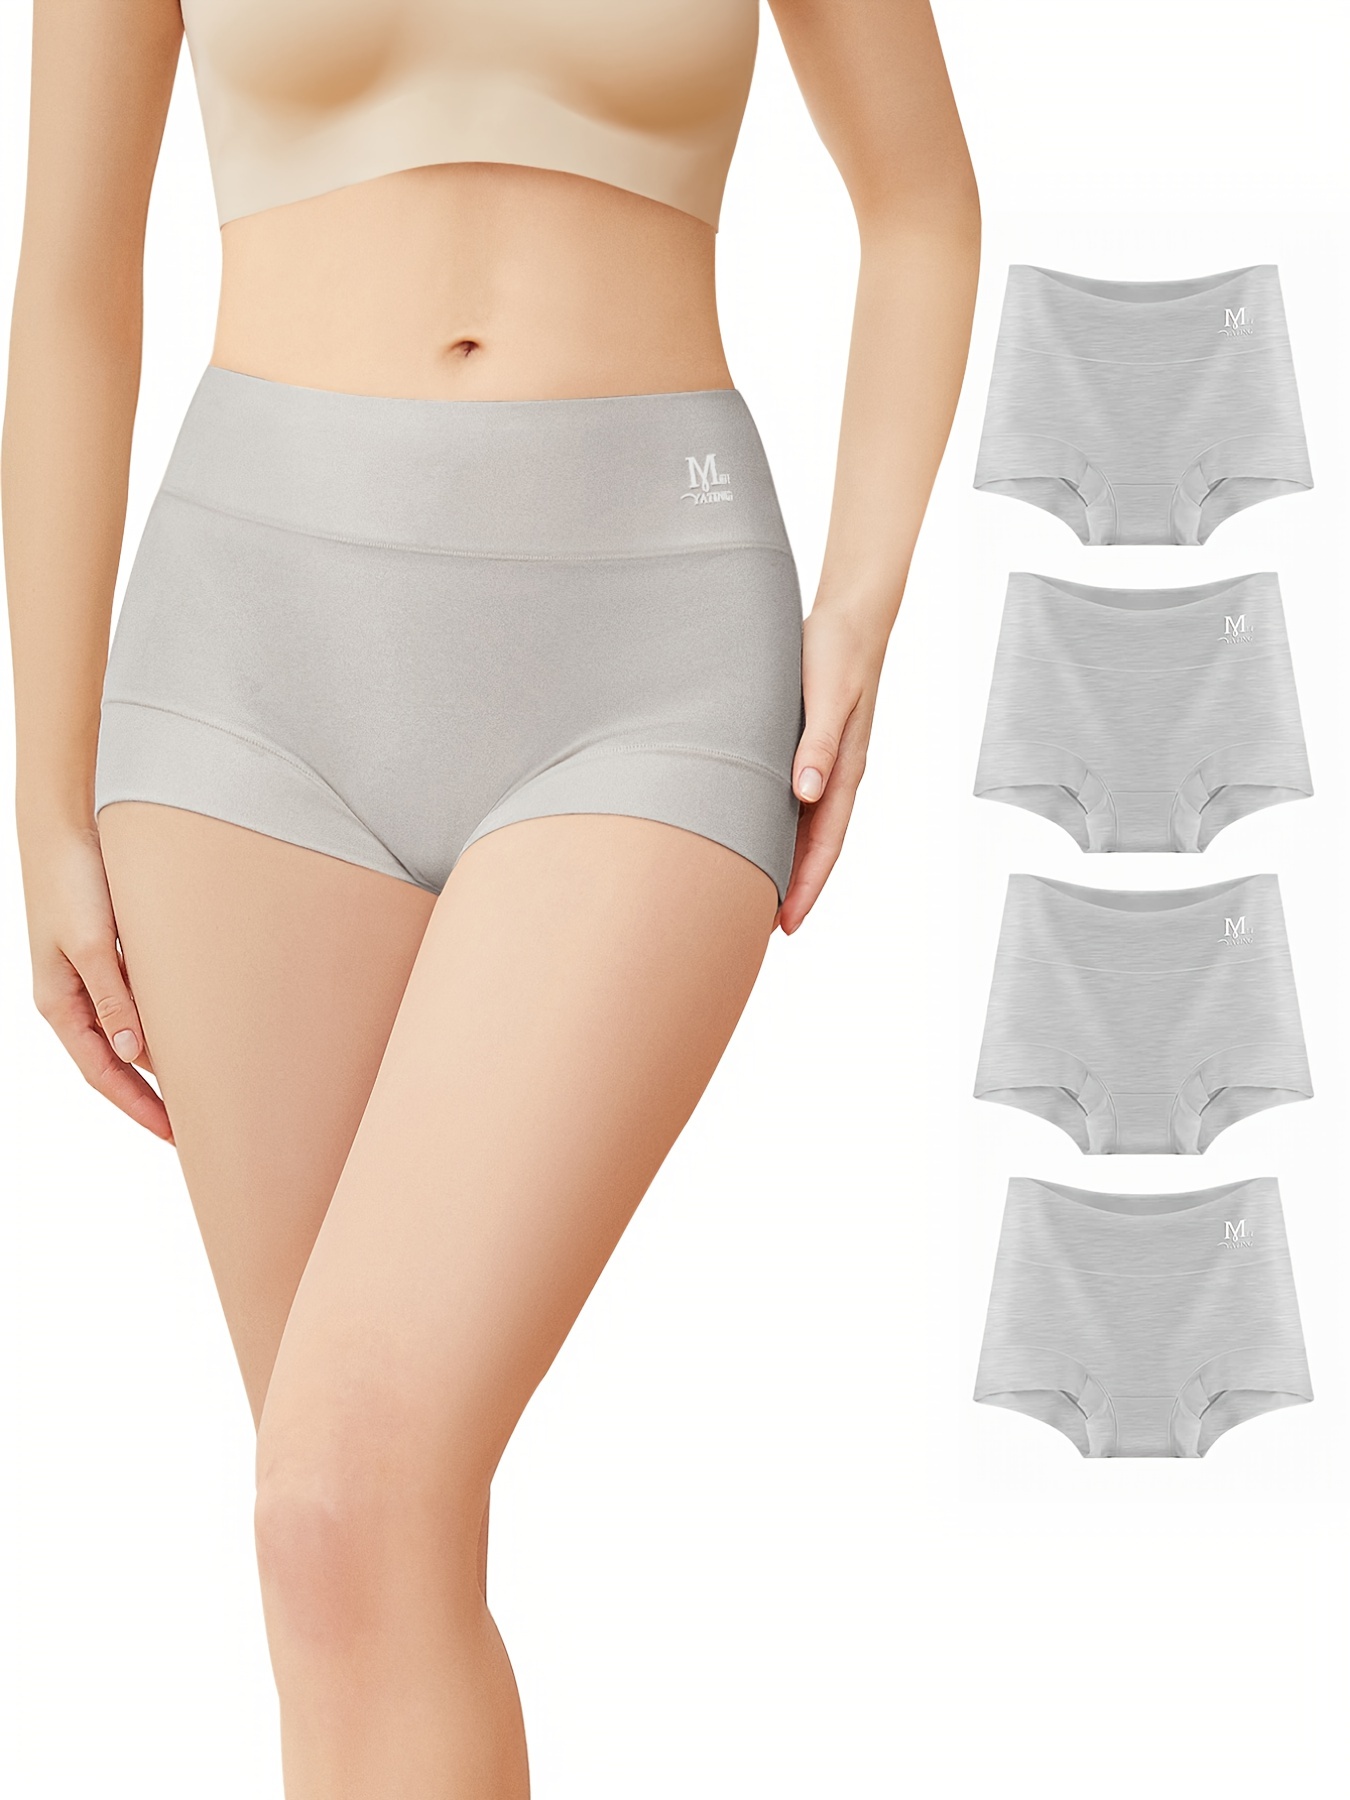 MYO Boyshort panties for women/Sorty/Solid Hipster Inner Wear Panty/ High  Rise Full Brief Cotton Stretch Full Coverage Panty/ladies, women,girls  underwear/sorty/knickers/boyshorts panties/boy shorts panties/briefs/panties  for girls/ Long panties for